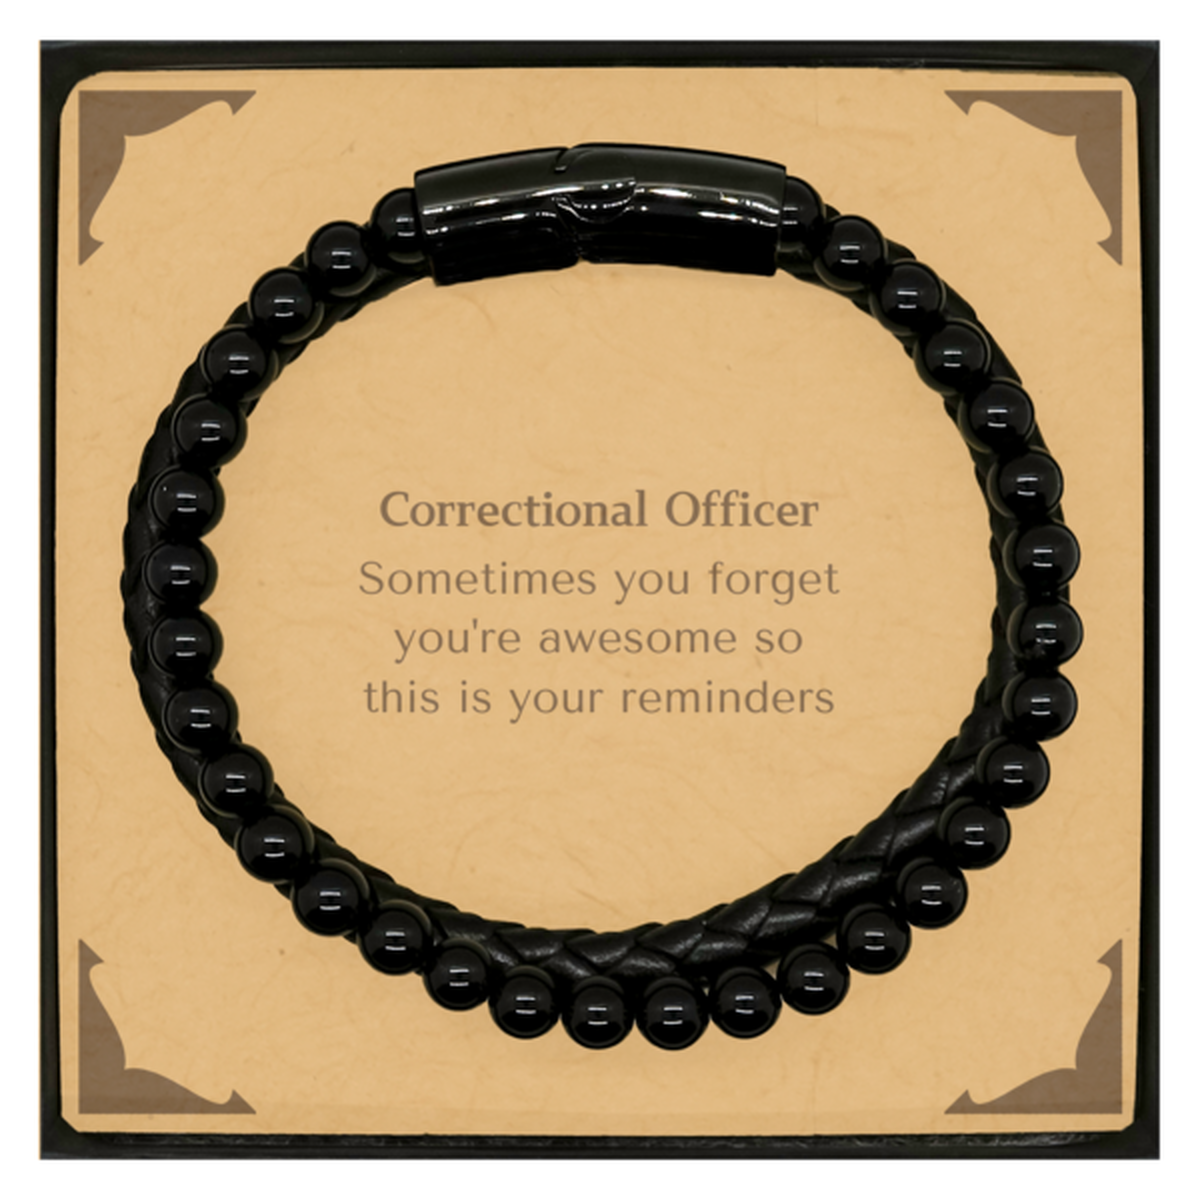 Sentimental Correctional Officer Stone Leather Bracelets, Correctional Officer Sometimes you forget you're awesome so this is your reminders, Graduation Christmas Birthday Gifts for Correctional Officer, Men, Women, Coworkers